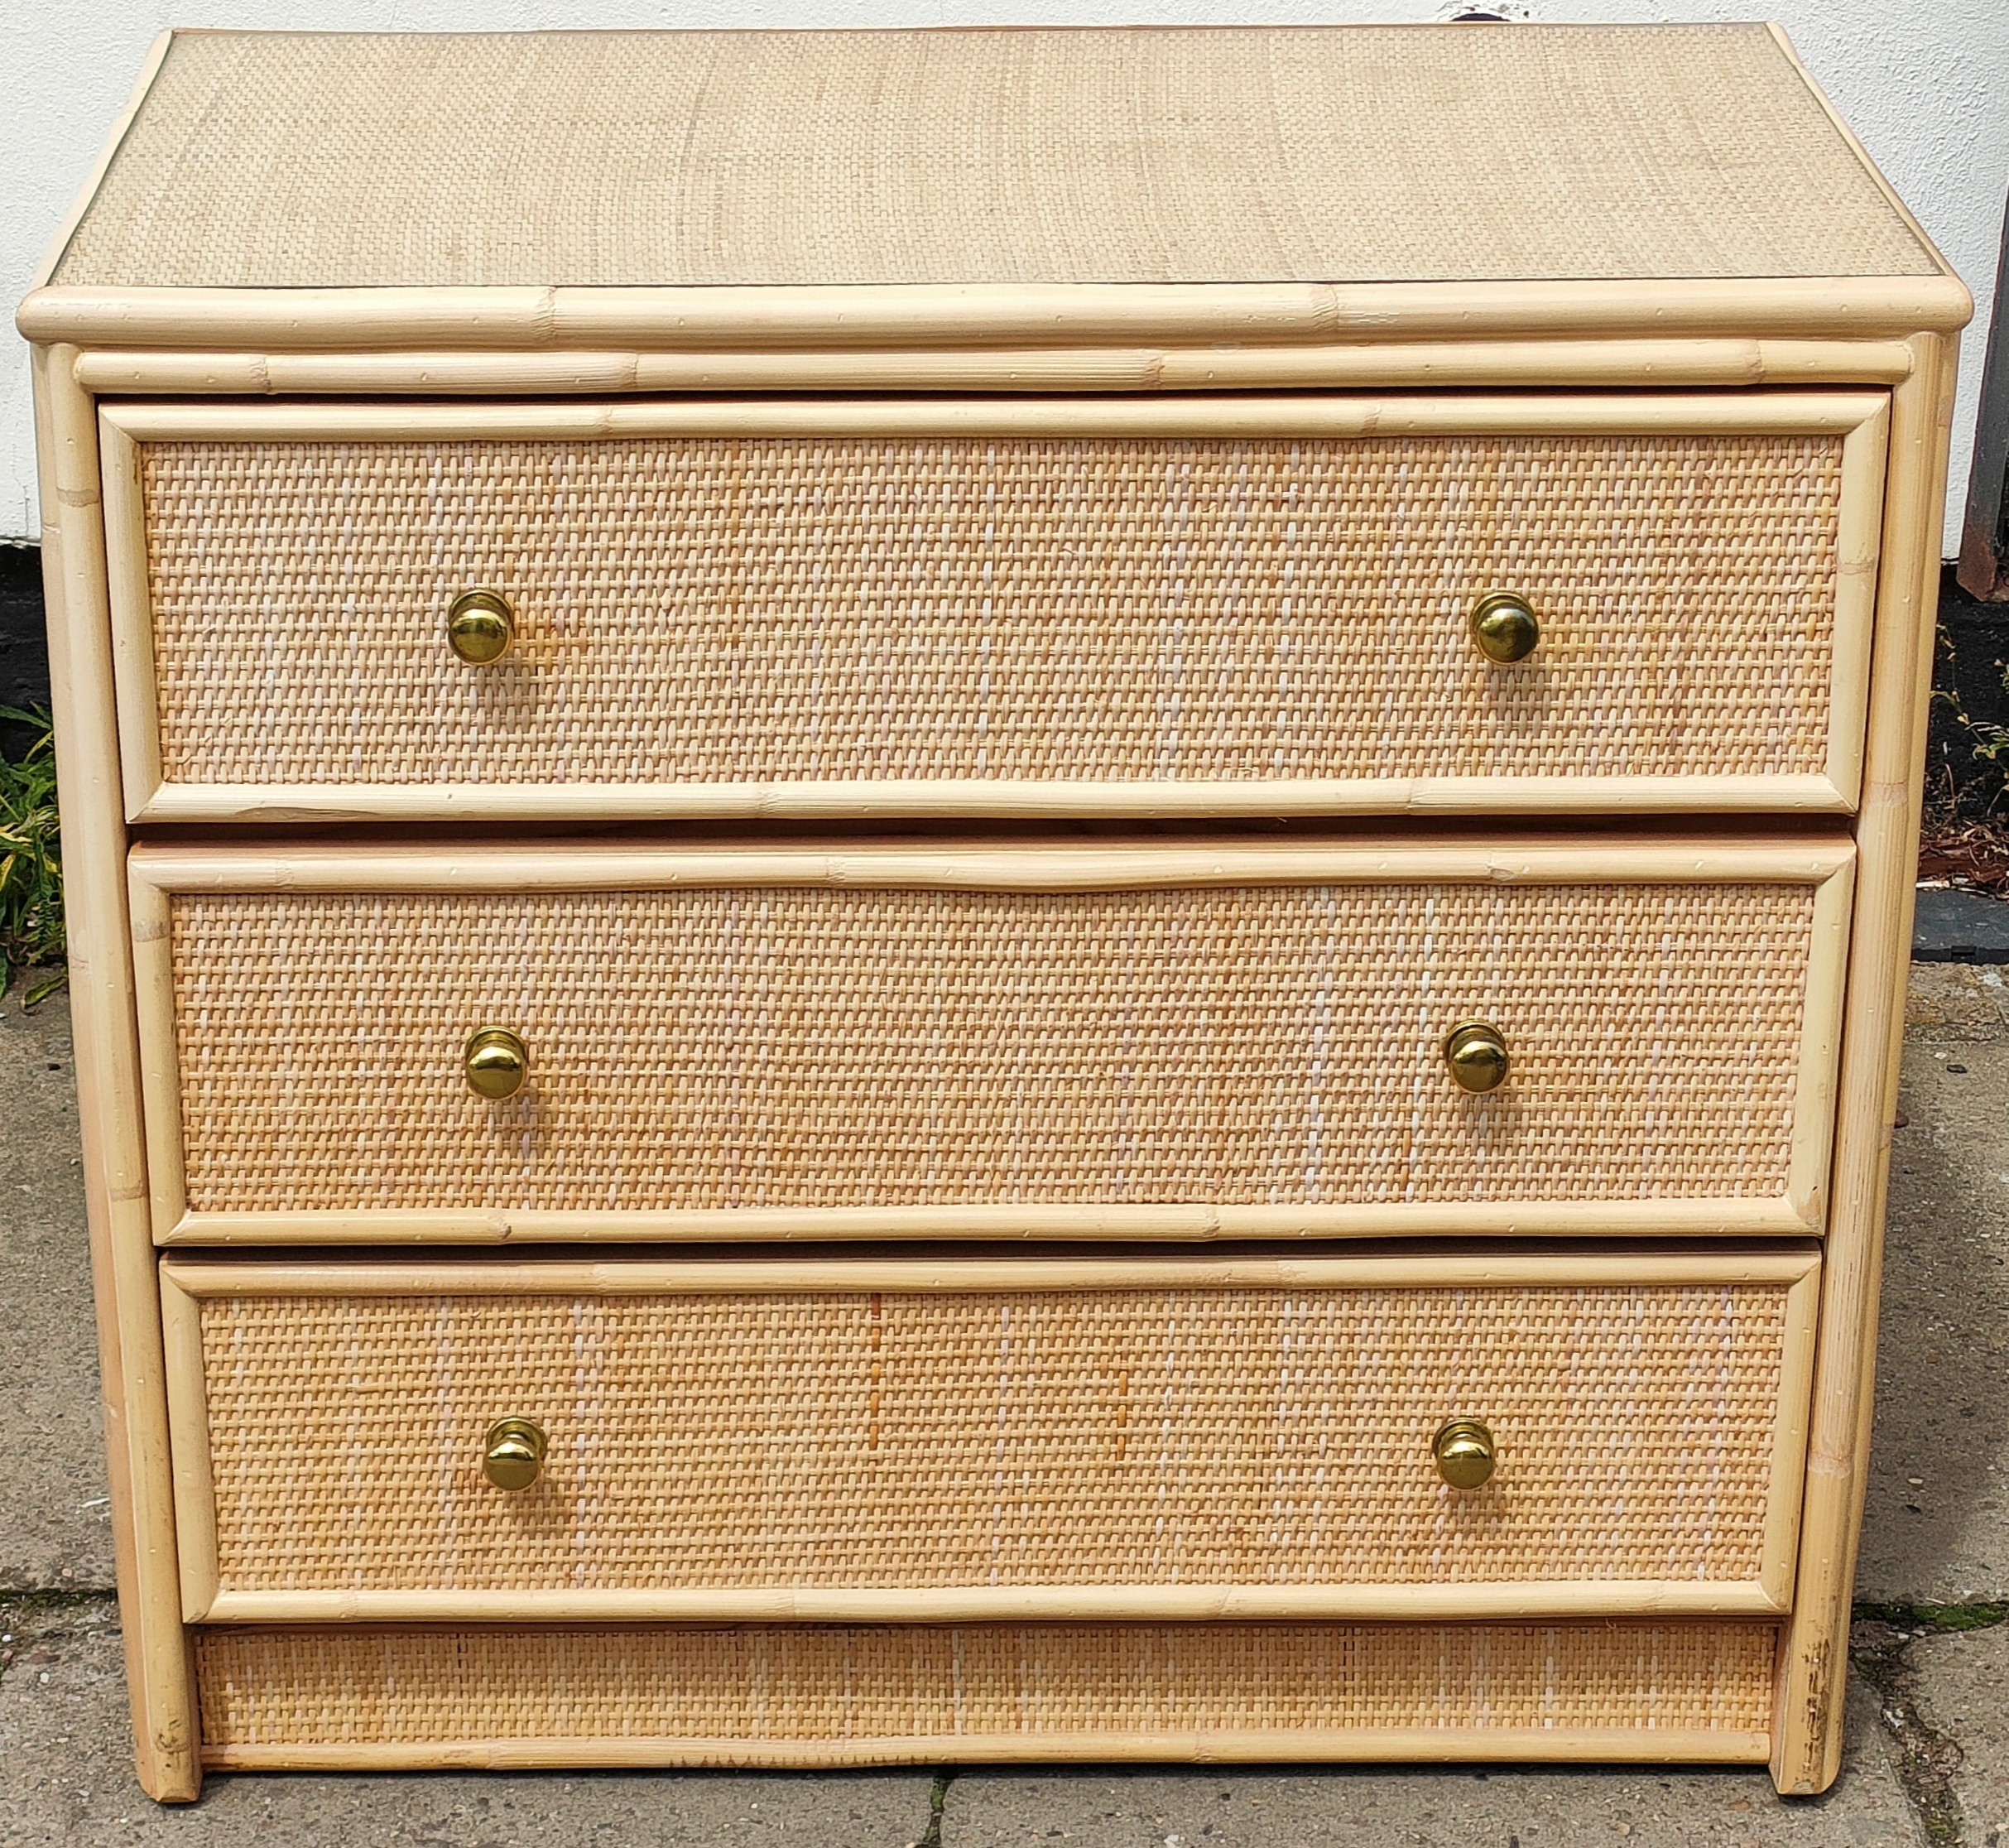 Three drawer rattan style chest of drawers. App. 72cm H x 79cm W x 45.5cm D Reasonable used